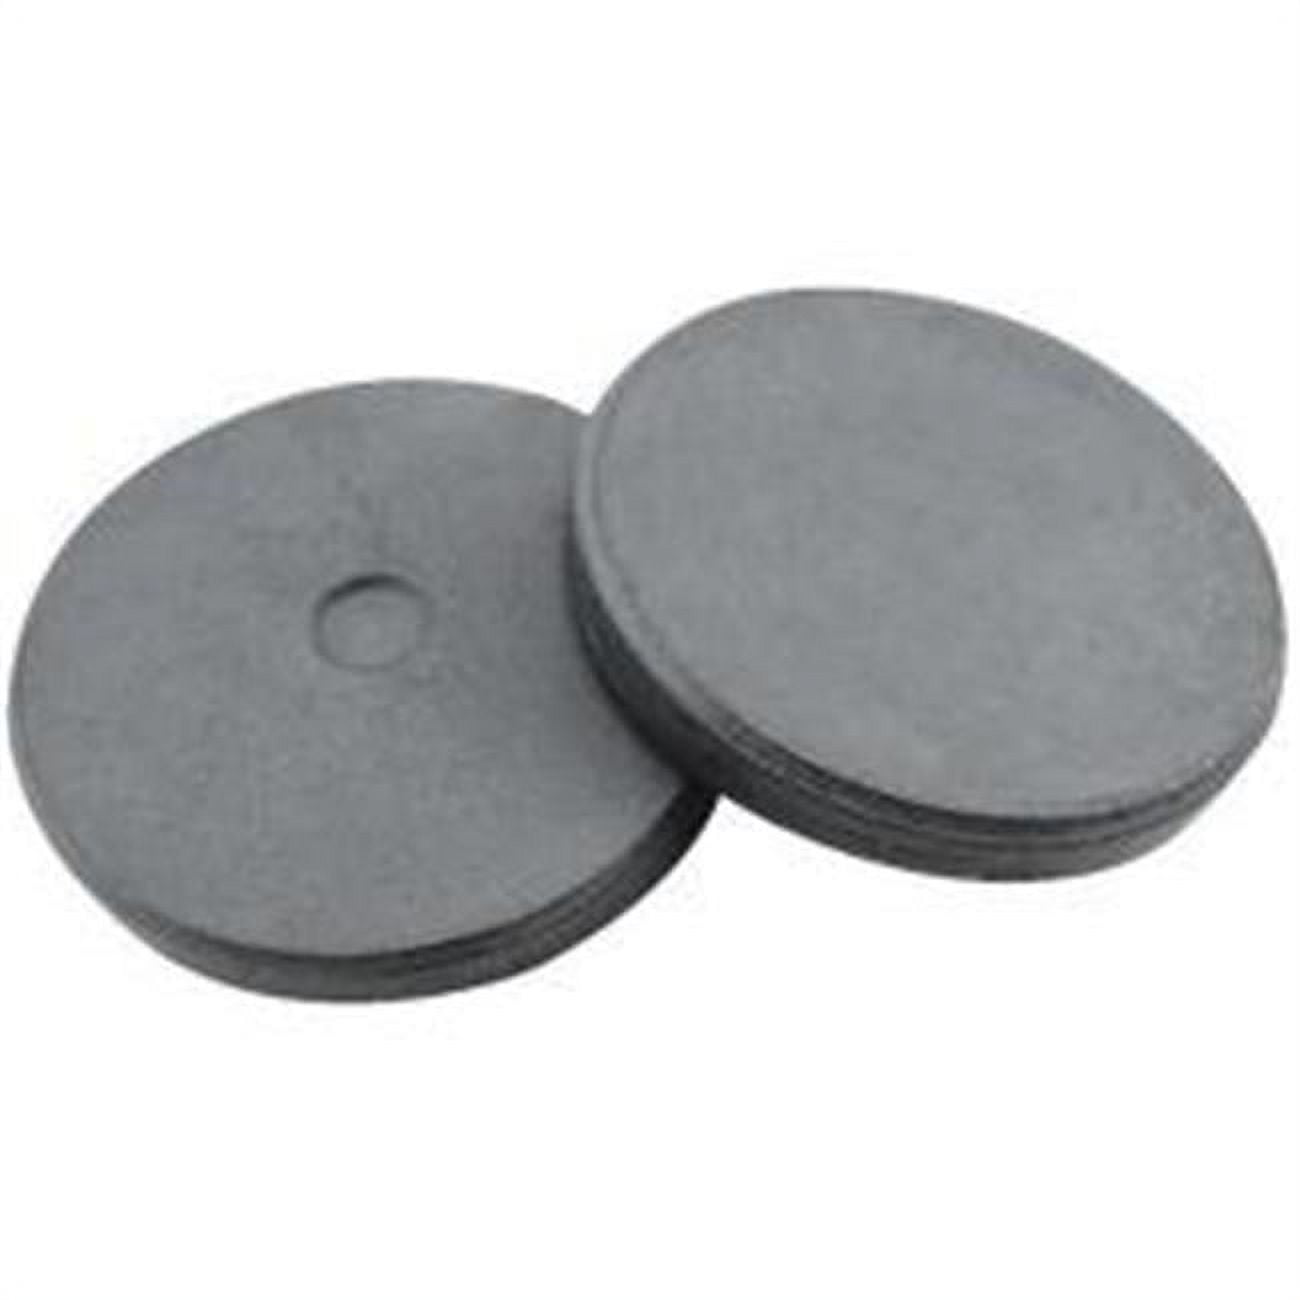 1.5 In. Ceramic Disc Magnets - Card Of 2